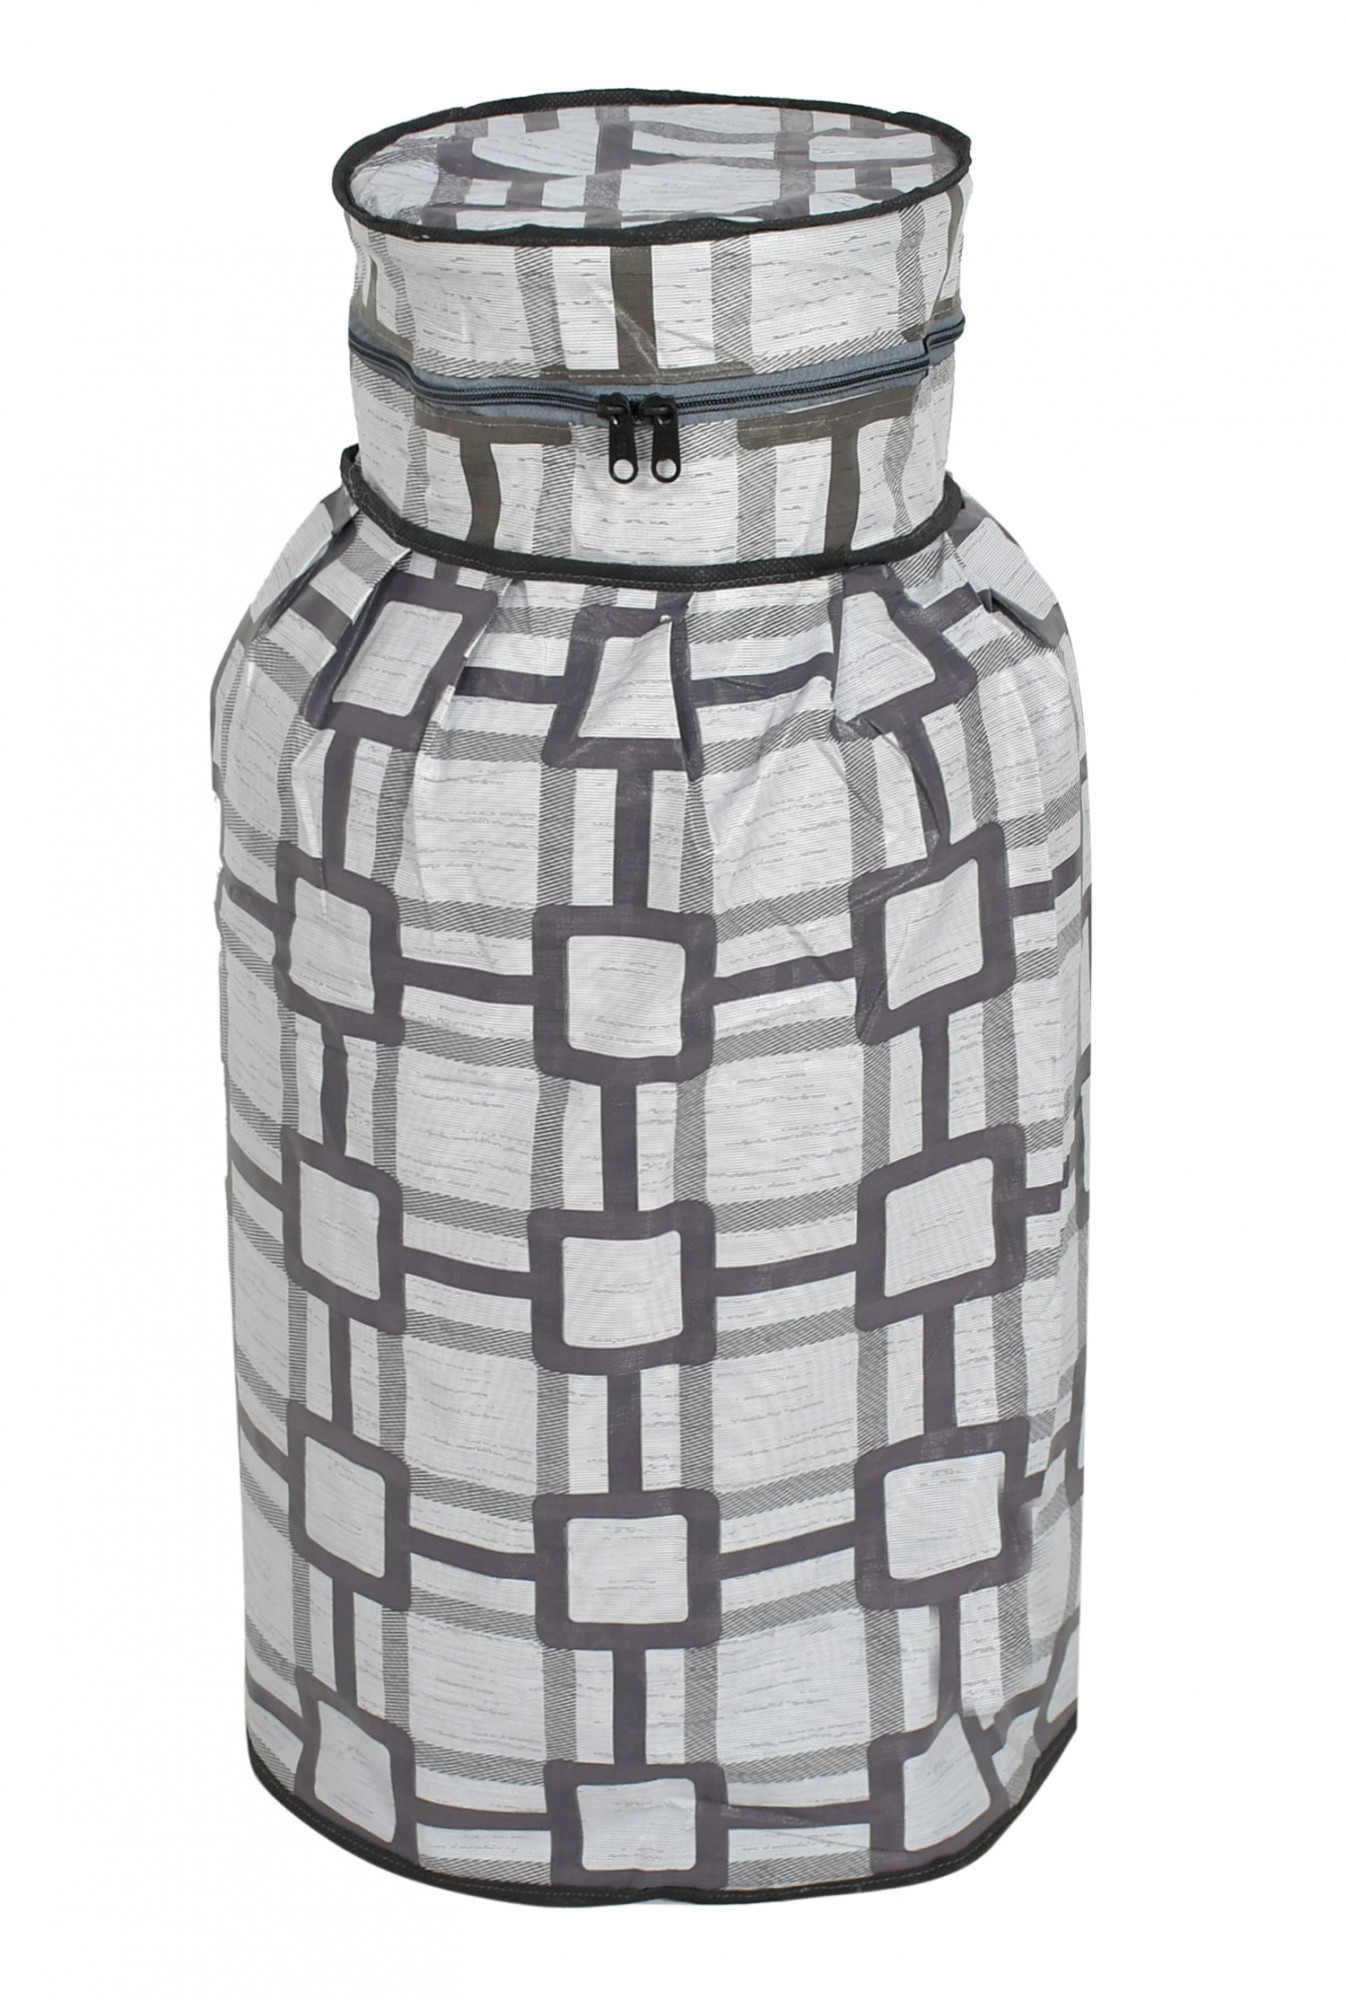 Kuber Industries Square Printed Stain Dust Proof PVC Lpg Gas Cylinder Cover (Grey)-HS43KUBMART25626, Standard